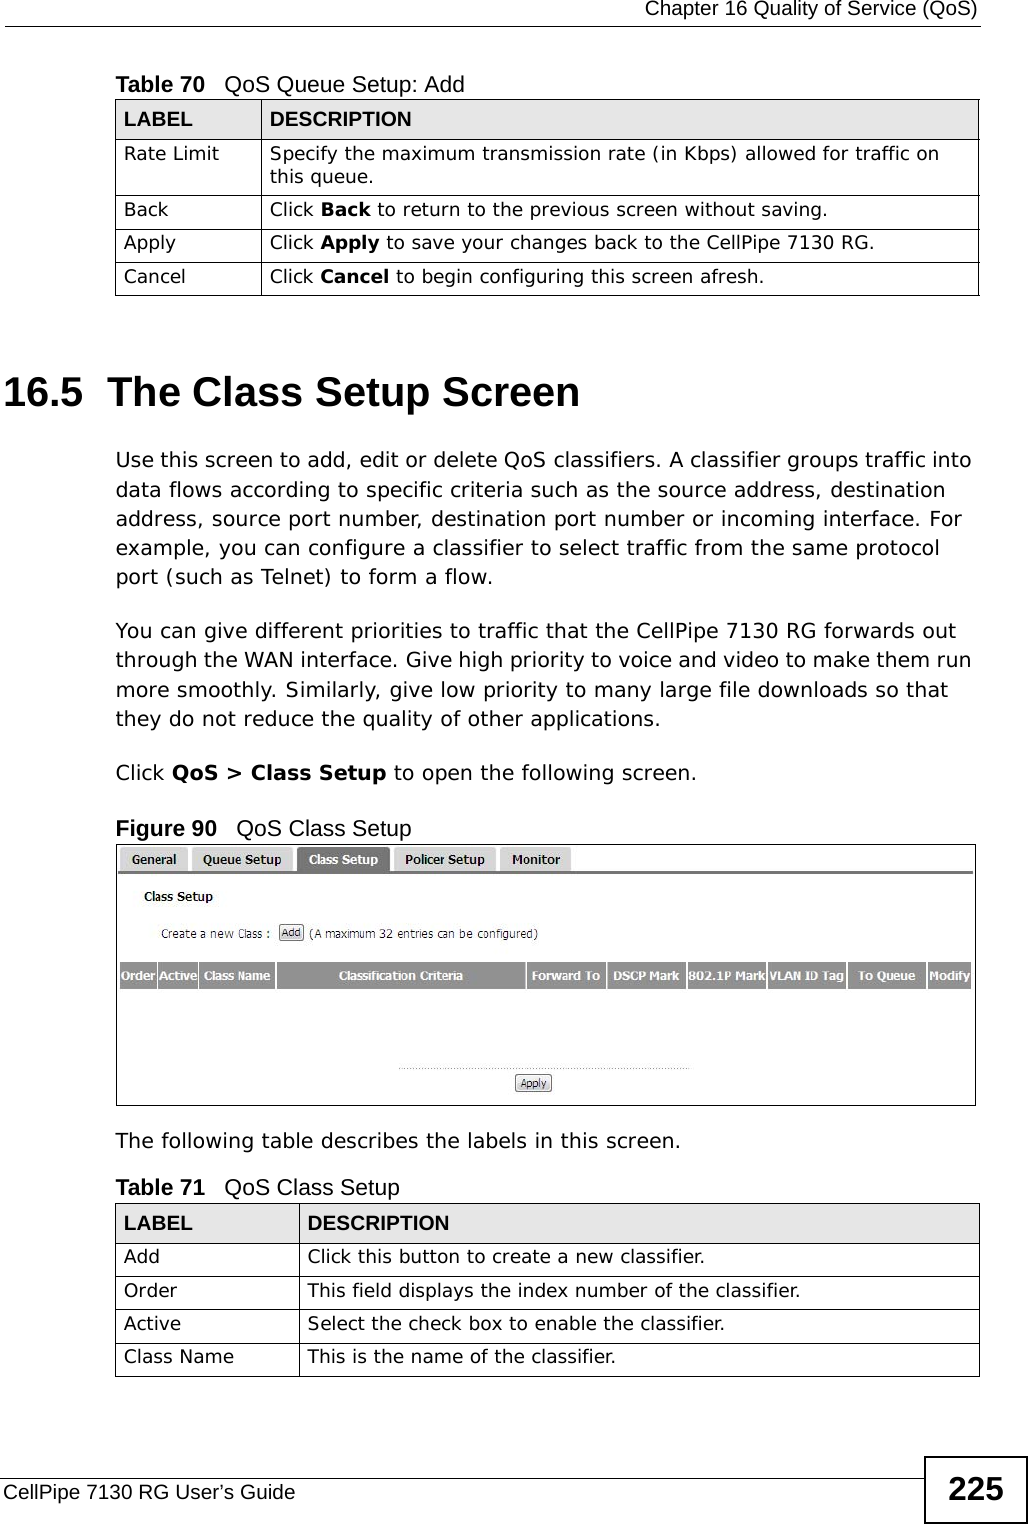  Chapter 16 Quality of Service (QoS)CellPipe 7130 RG User’s Guide 22516.5  The Class Setup Screen   Use this screen to add, edit or delete QoS classifiers. A classifier groups traffic into data flows according to specific criteria such as the source address, destination address, source port number, destination port number or incoming interface. For example, you can configure a classifier to select traffic from the same protocol port (such as Telnet) to form a flow.You can give different priorities to traffic that the CellPipe 7130 RG forwards out through the WAN interface. Give high priority to voice and video to make them run more smoothly. Similarly, give low priority to many large file downloads so that they do not reduce the quality of other applications. Click QoS &gt; Class Setup to open the following screen.Figure 90   QoS Class Setup The following table describes the labels in this screen.  Rate Limit Specify the maximum transmission rate (in Kbps) allowed for traffic on this queue.Back Click Back to return to the previous screen without saving.Apply Click Apply to save your changes back to the CellPipe 7130 RG.Cancel Click Cancel to begin configuring this screen afresh.Table 70   QoS Queue Setup: AddLABEL DESCRIPTIONTable 71   QoS Class SetupLABEL DESCRIPTIONAdd Click this button to create a new classifier.Order  This field displays the index number of the classifier.Active Select the check box to enable the classifier.Class Name This is the name of the classifier.